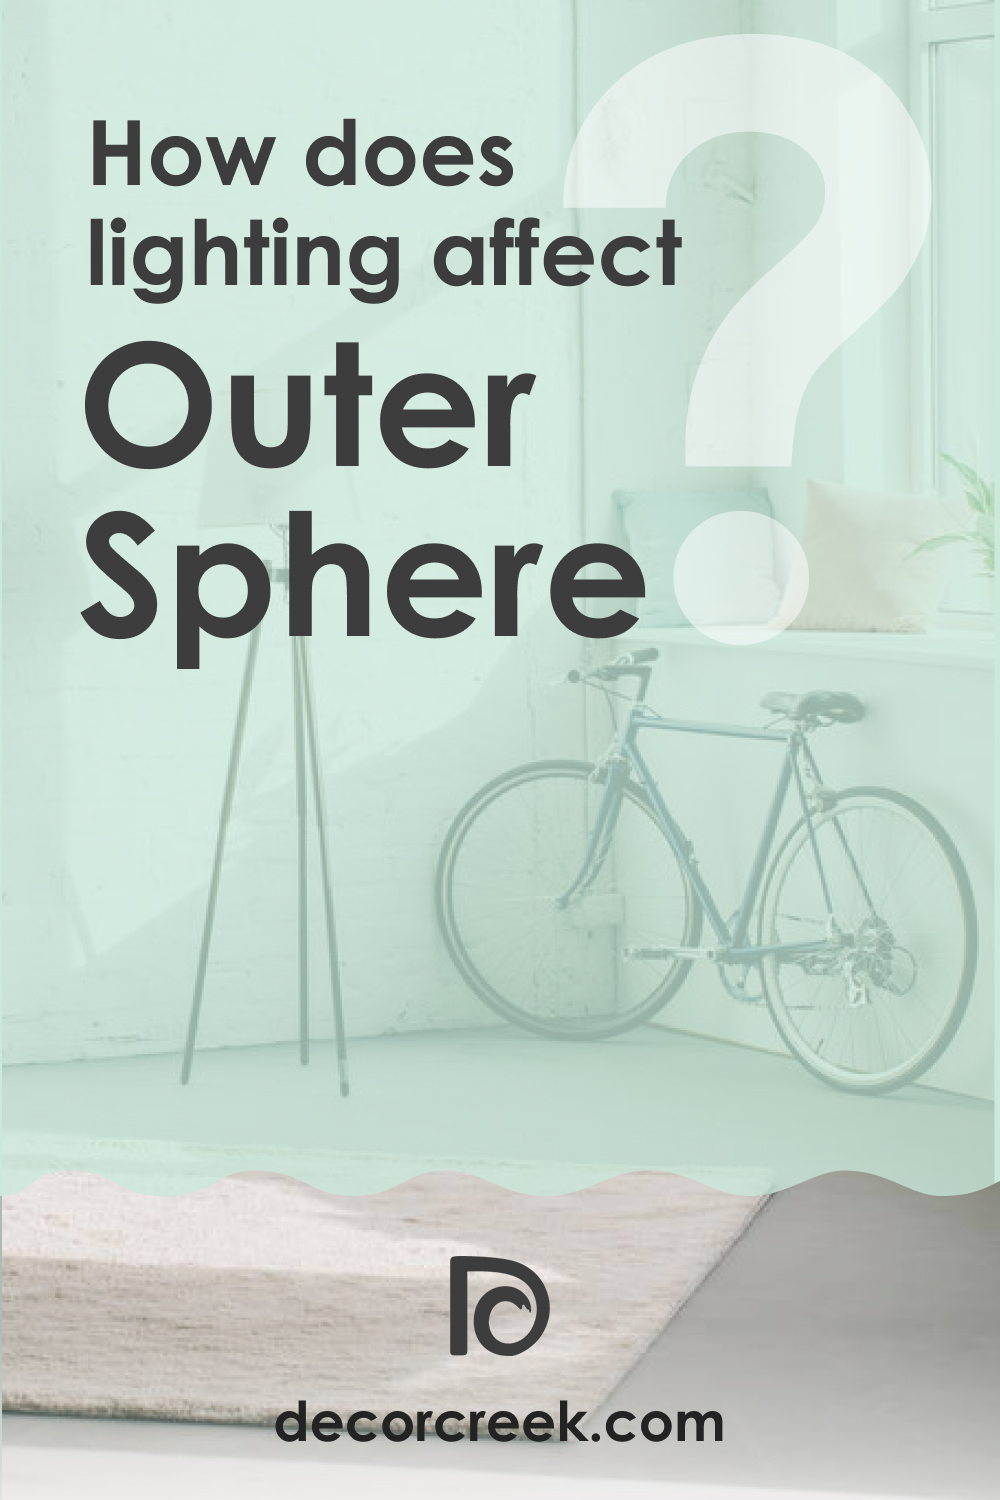 How Does Lighting Affect Outer Sphere 645?